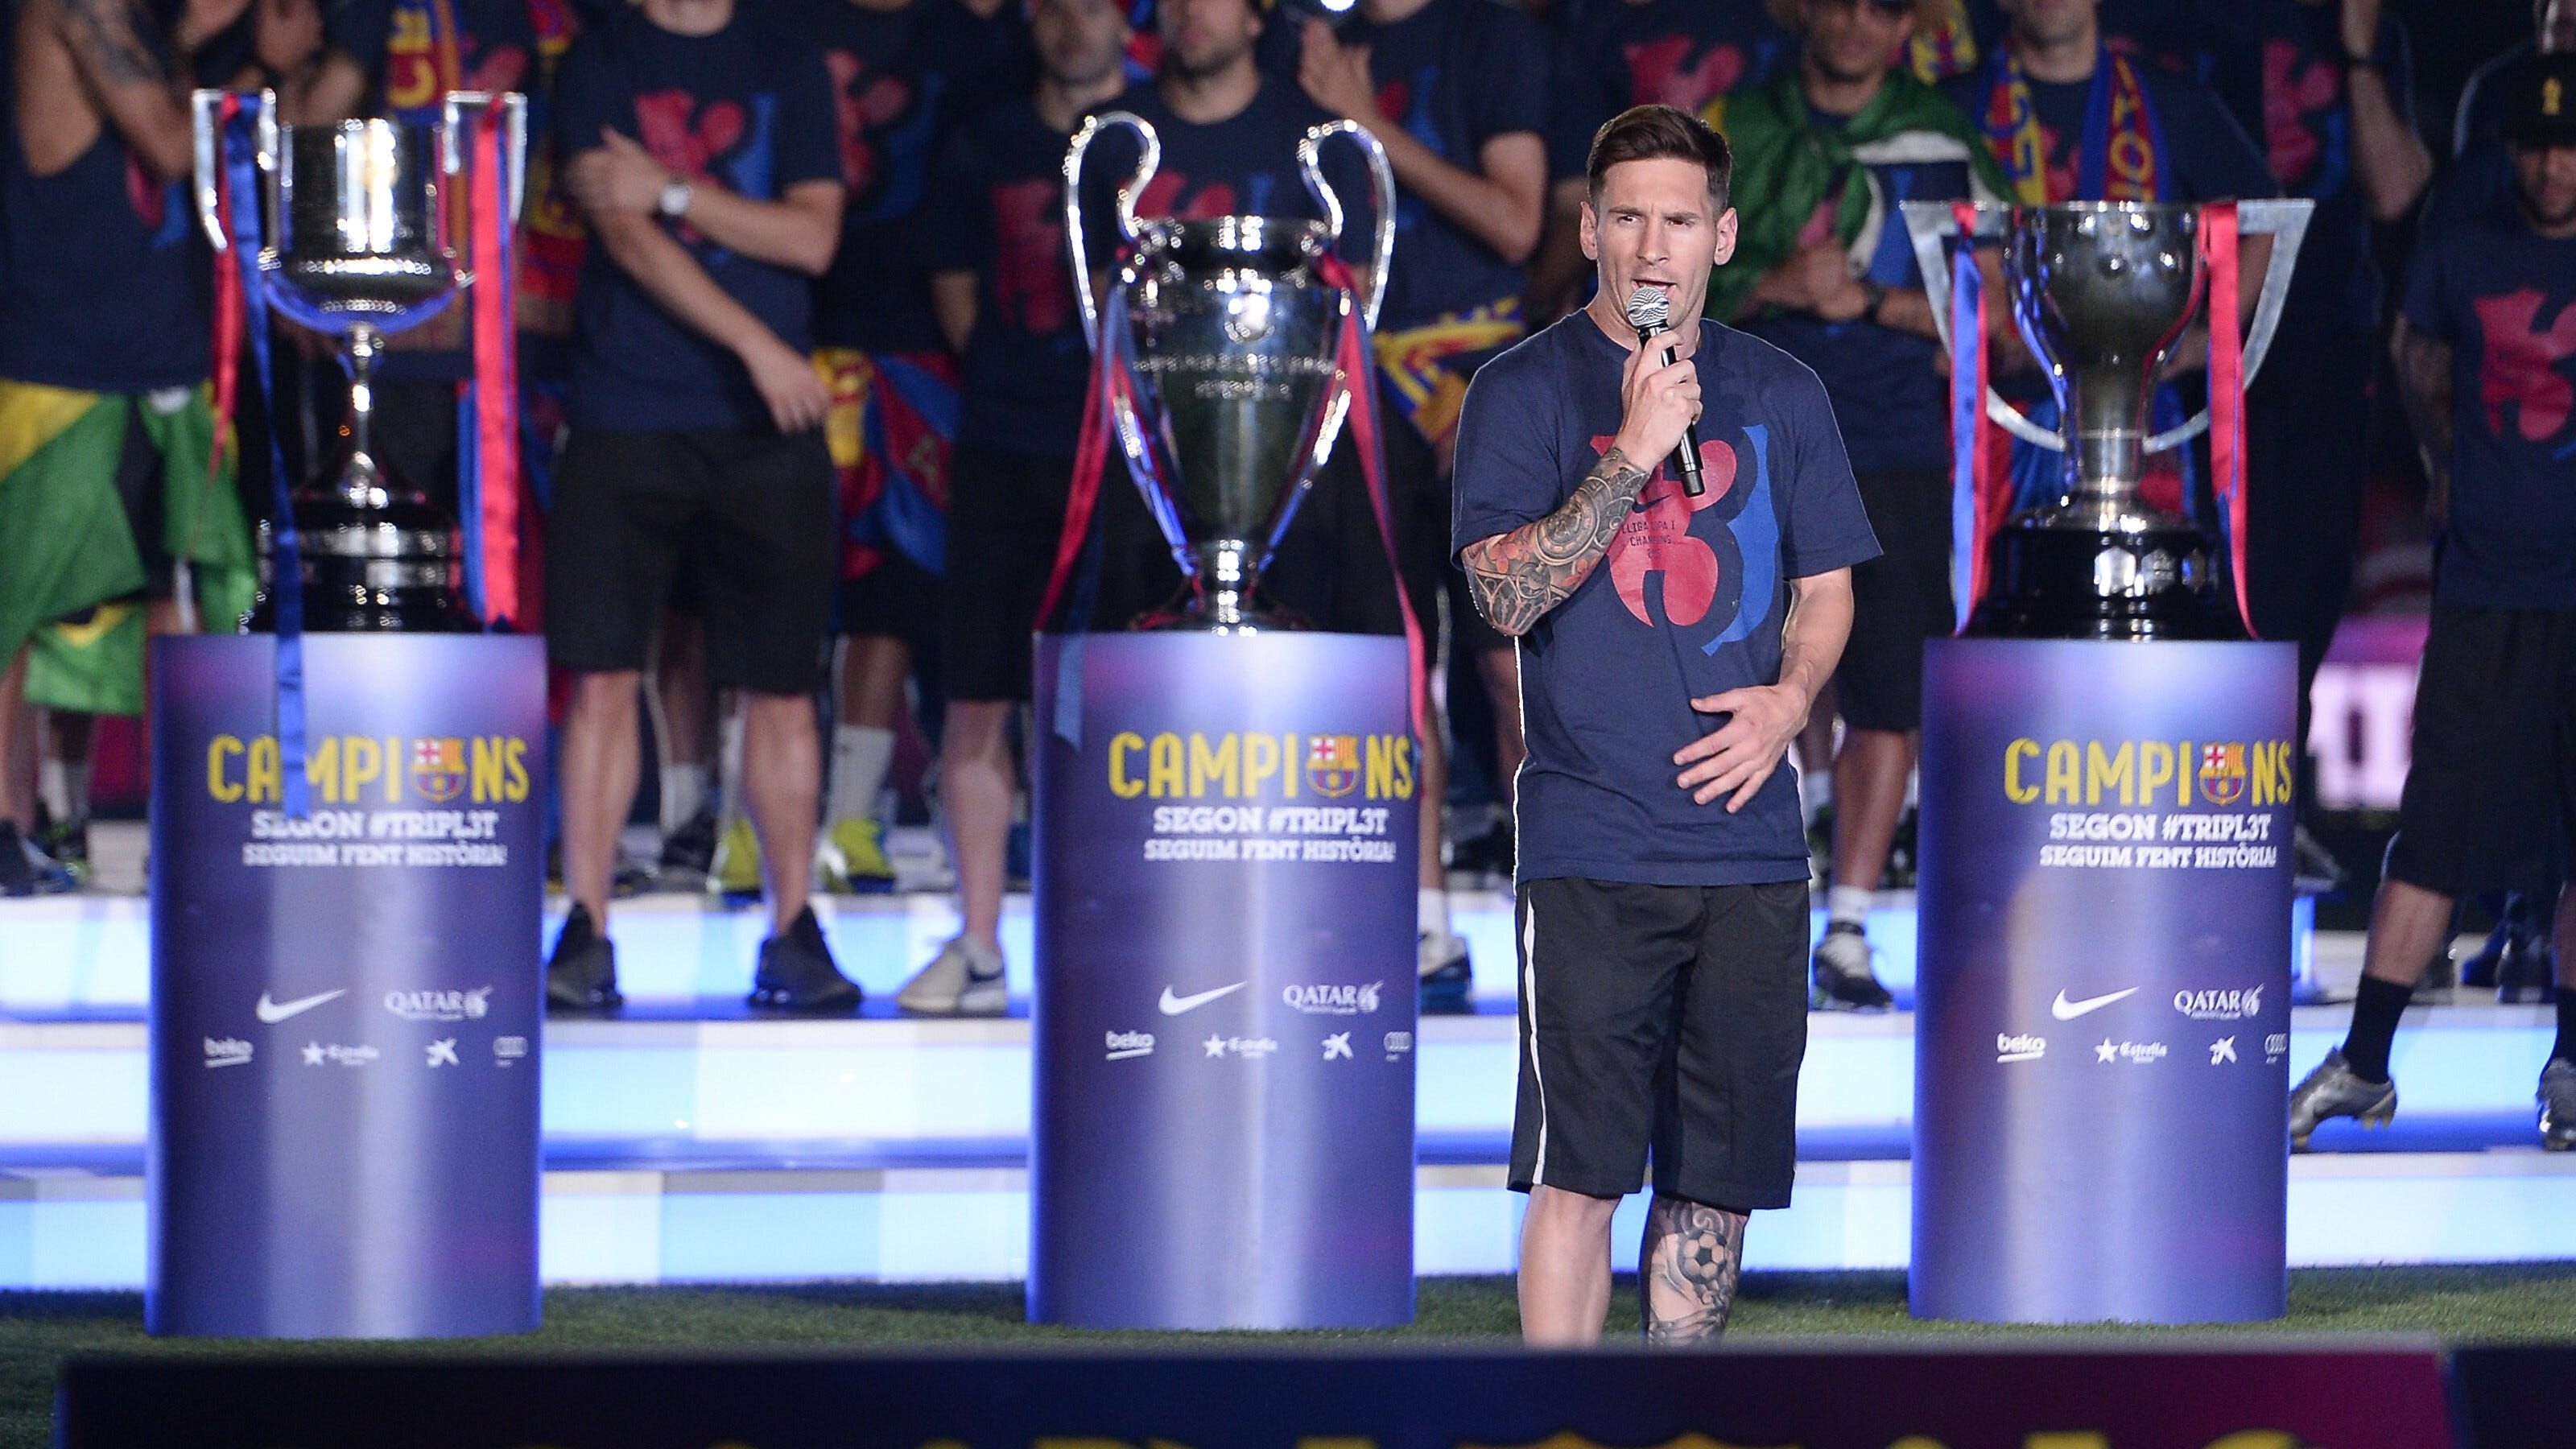 How many trophies has Lionel Messi won in his career?